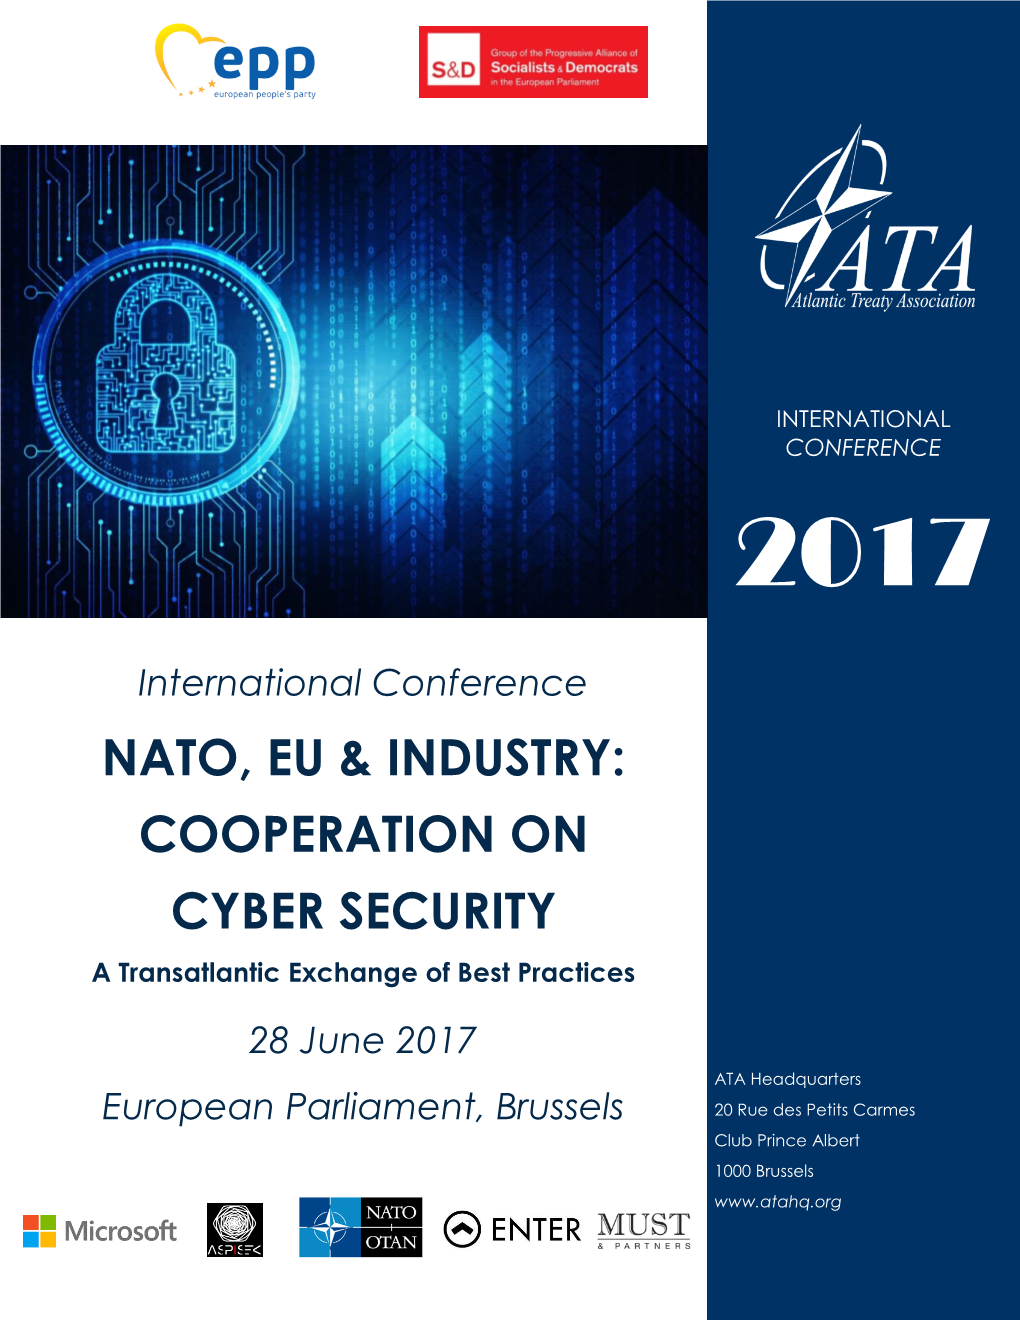 Nato, Eu & Industry: Cooperation on Cyber